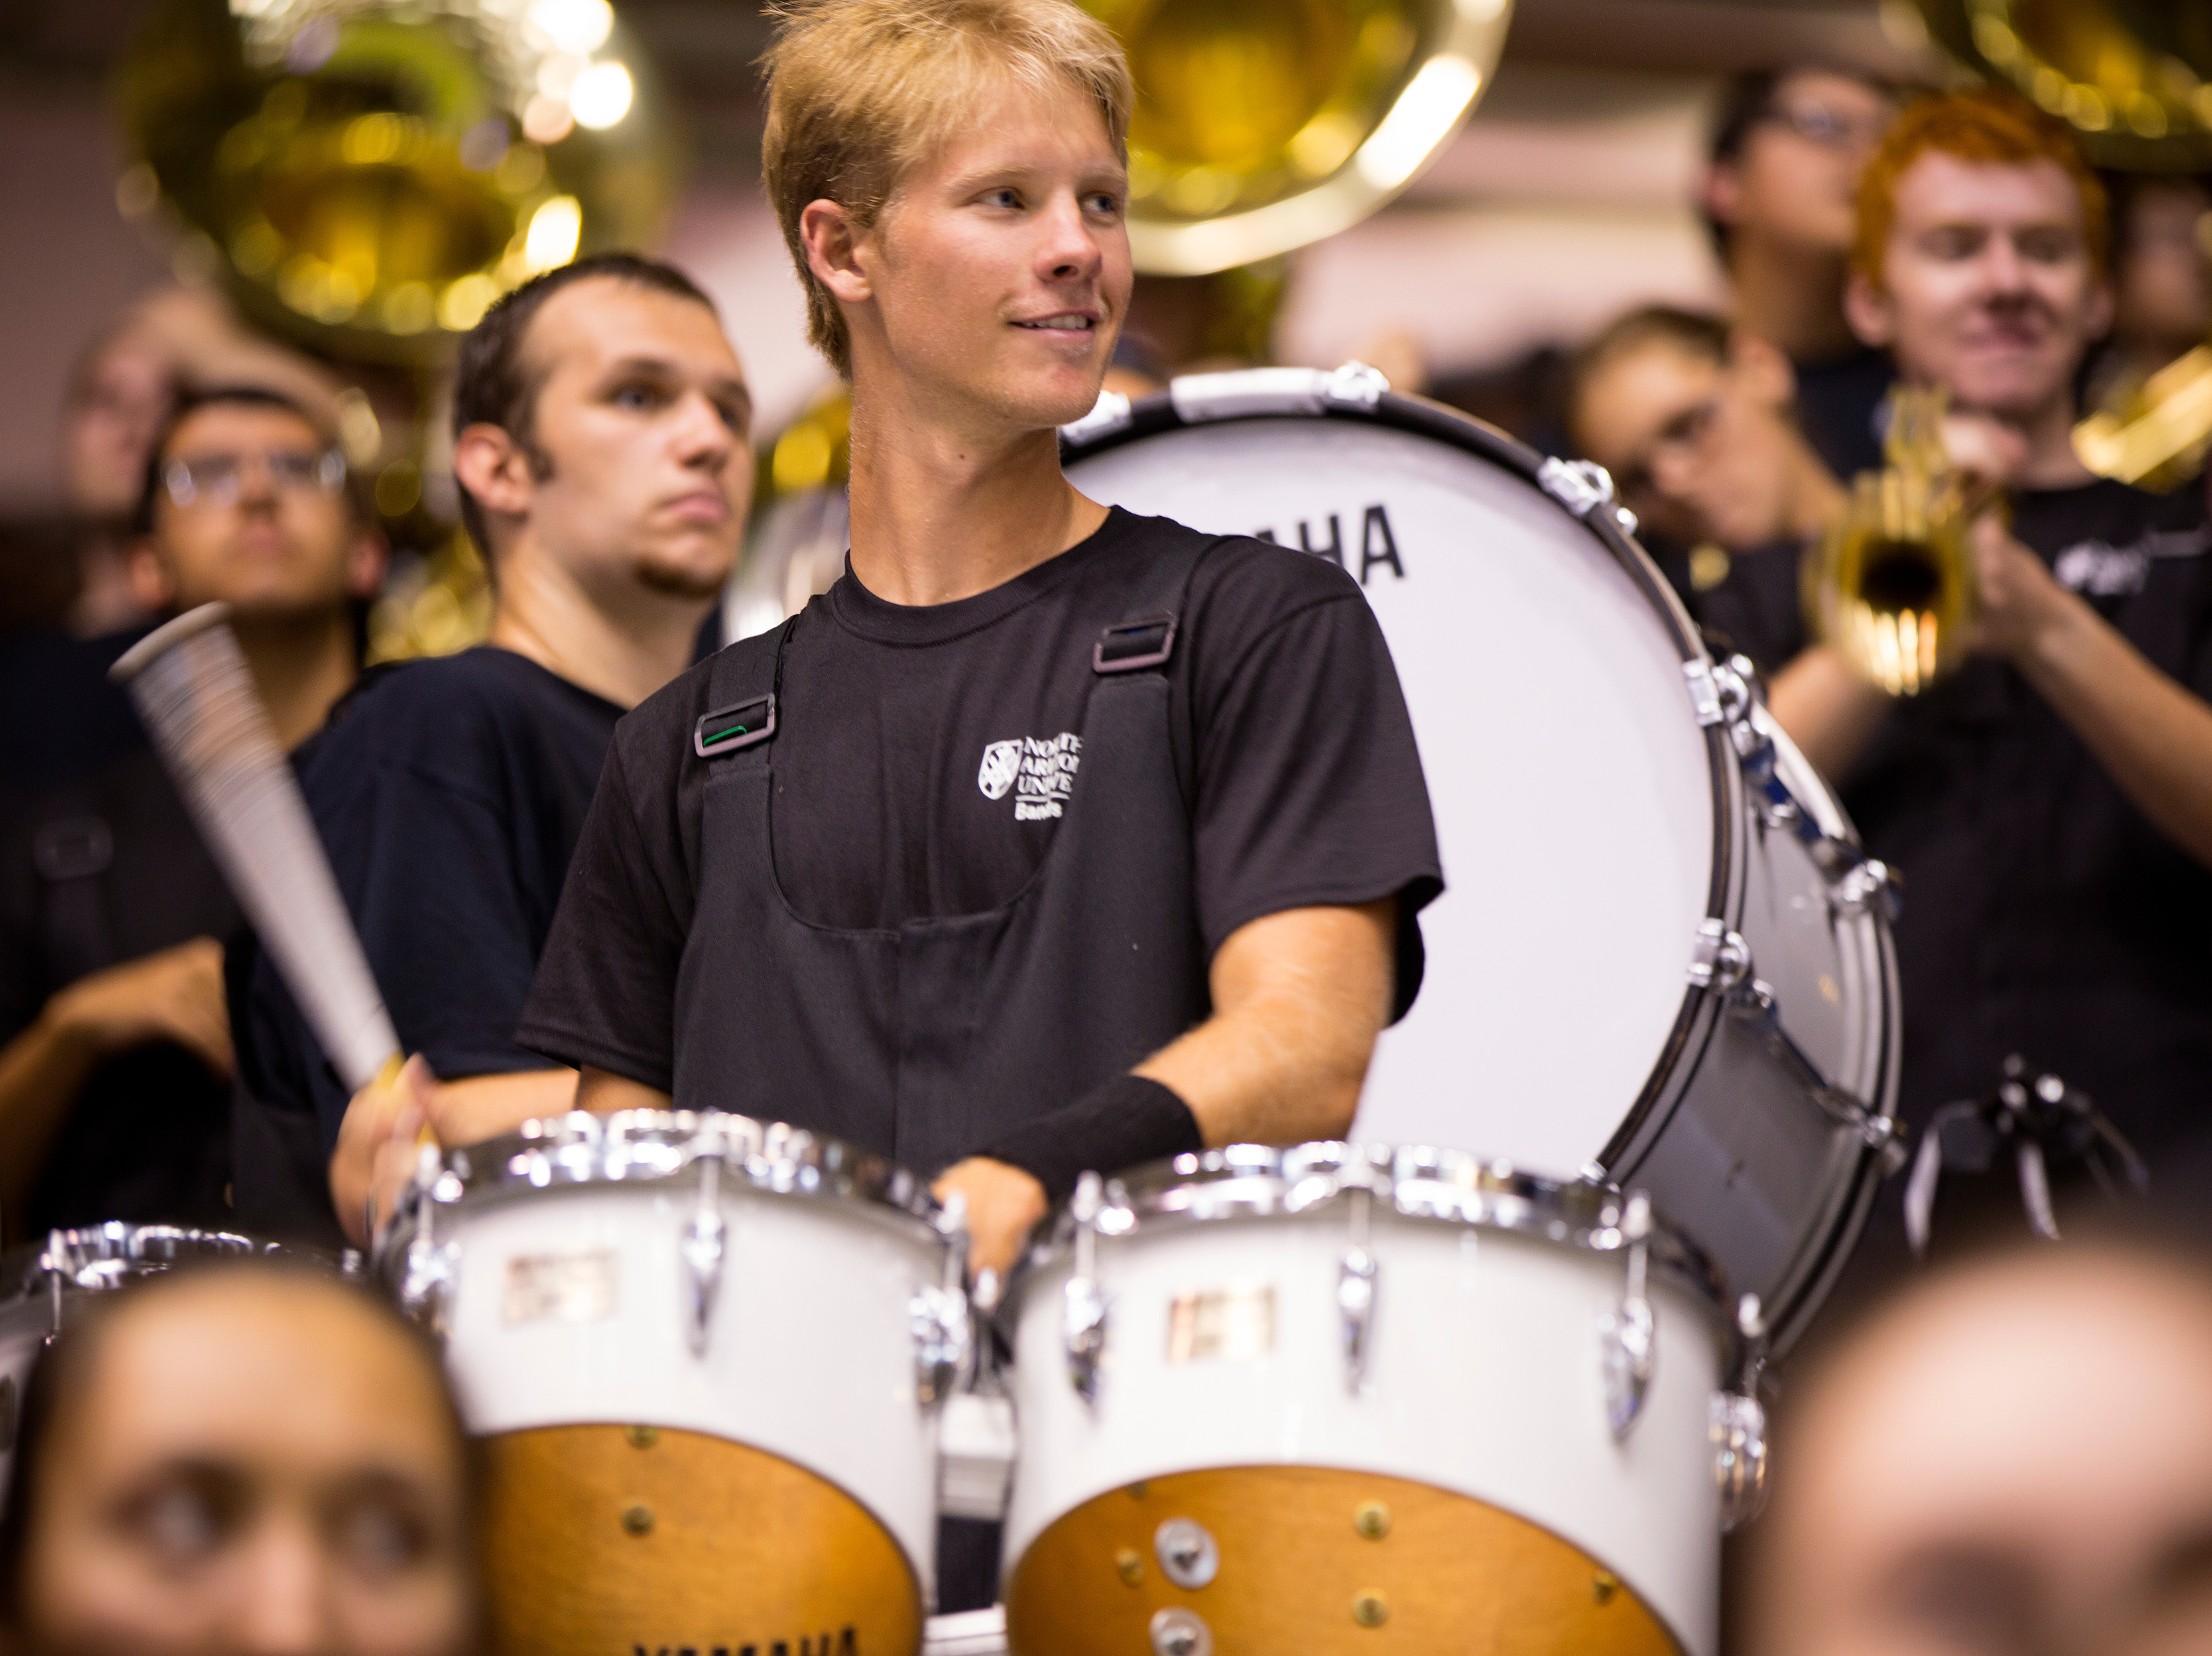 Marching band student plays drums